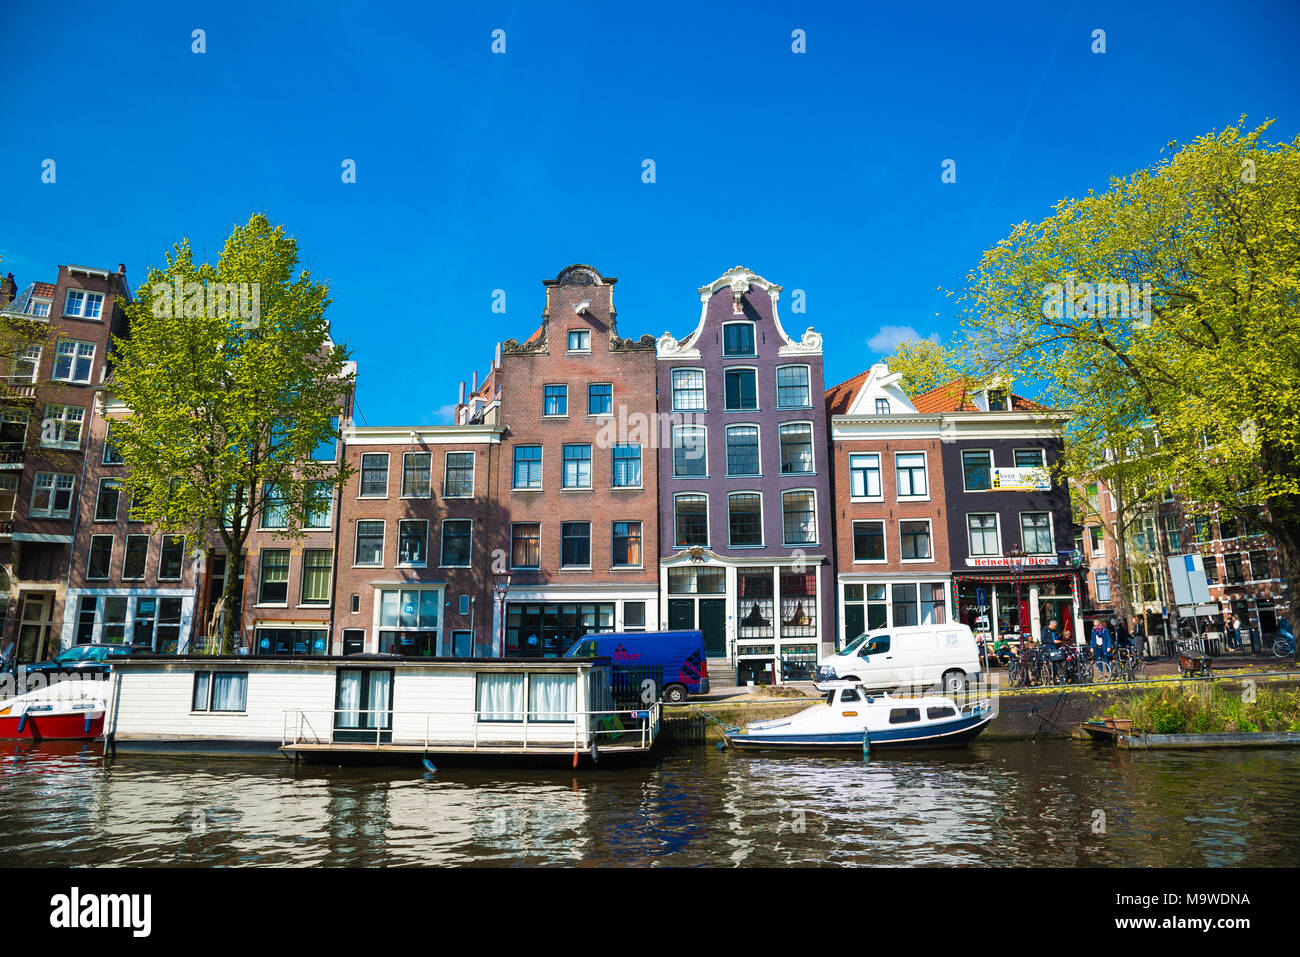 Amsterdam, Netherlands - April 20, 2017: Amsterdam canal and beautiful traditional old buildings, Netherlands Stock Photo